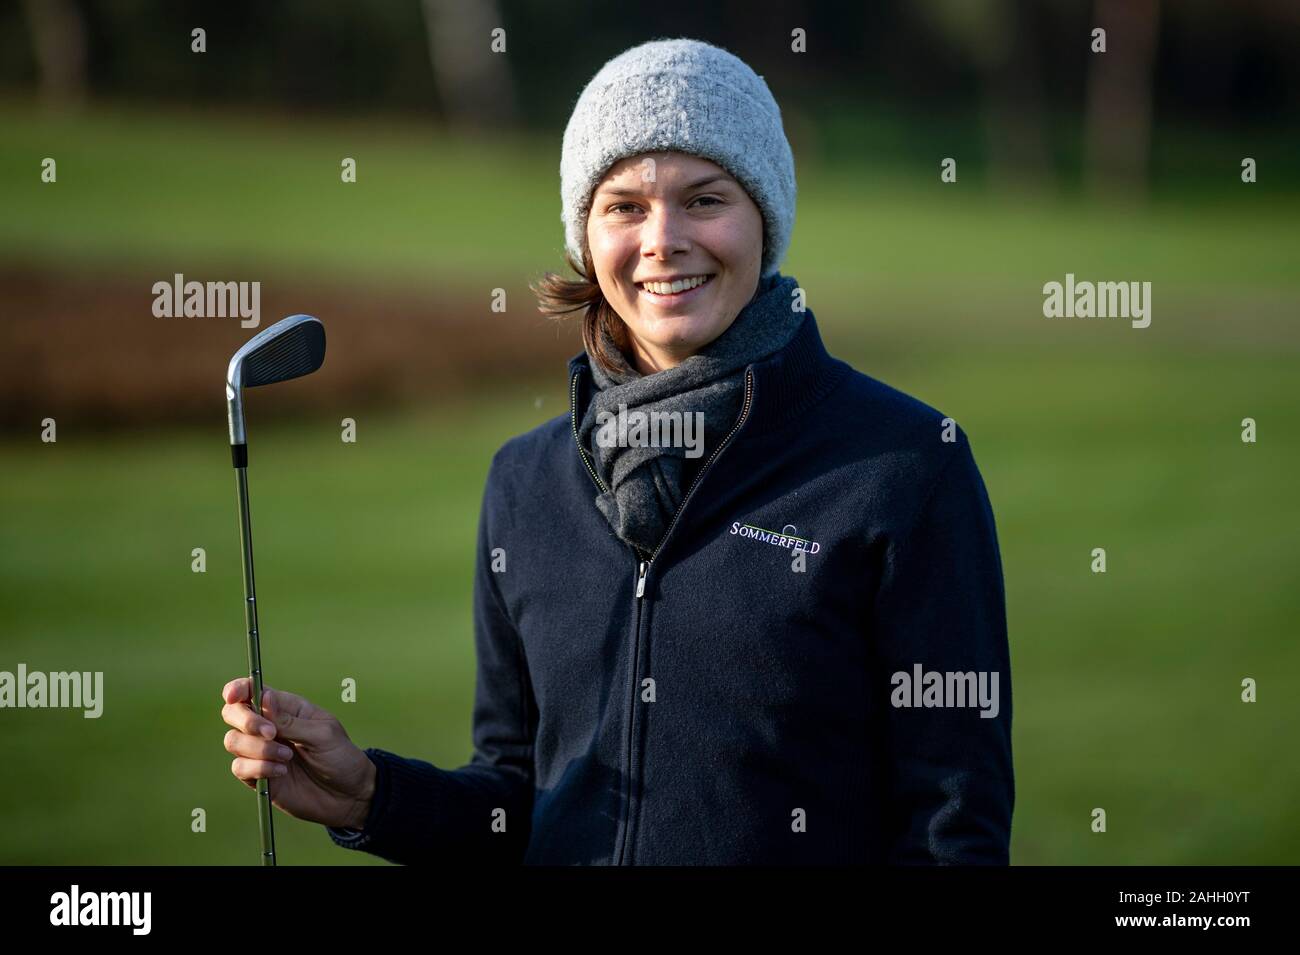 Hamburg, Germany. 22nd Nov, 2019. The golfer Esther Henseleit stands on the  lawn of the Golf Club Falkenstein. Qualification for the American  Professional Tour, first tournament victory and now Hamburg's Sportswoman of